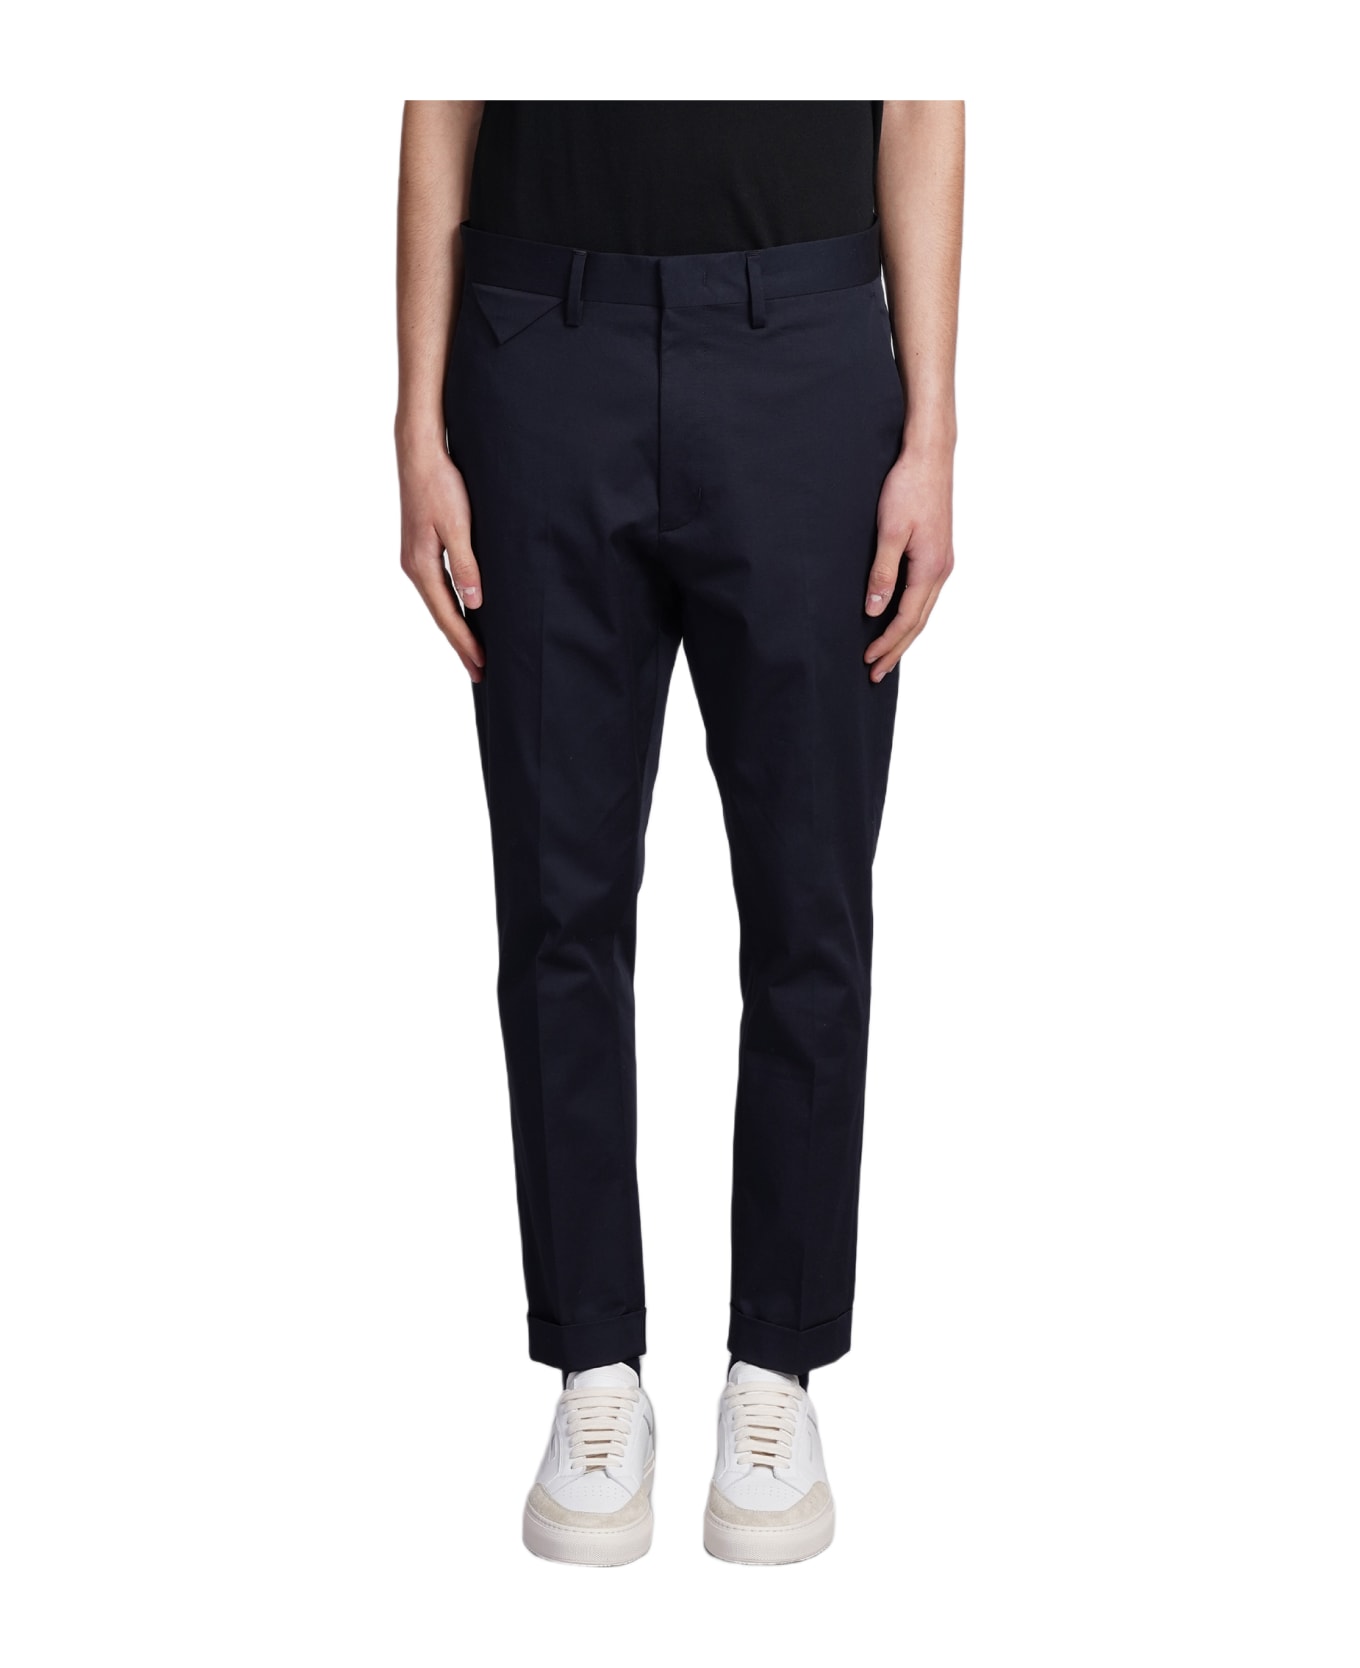 Low Brand Cooper T1.7 Pants In Blue Cotton - blue